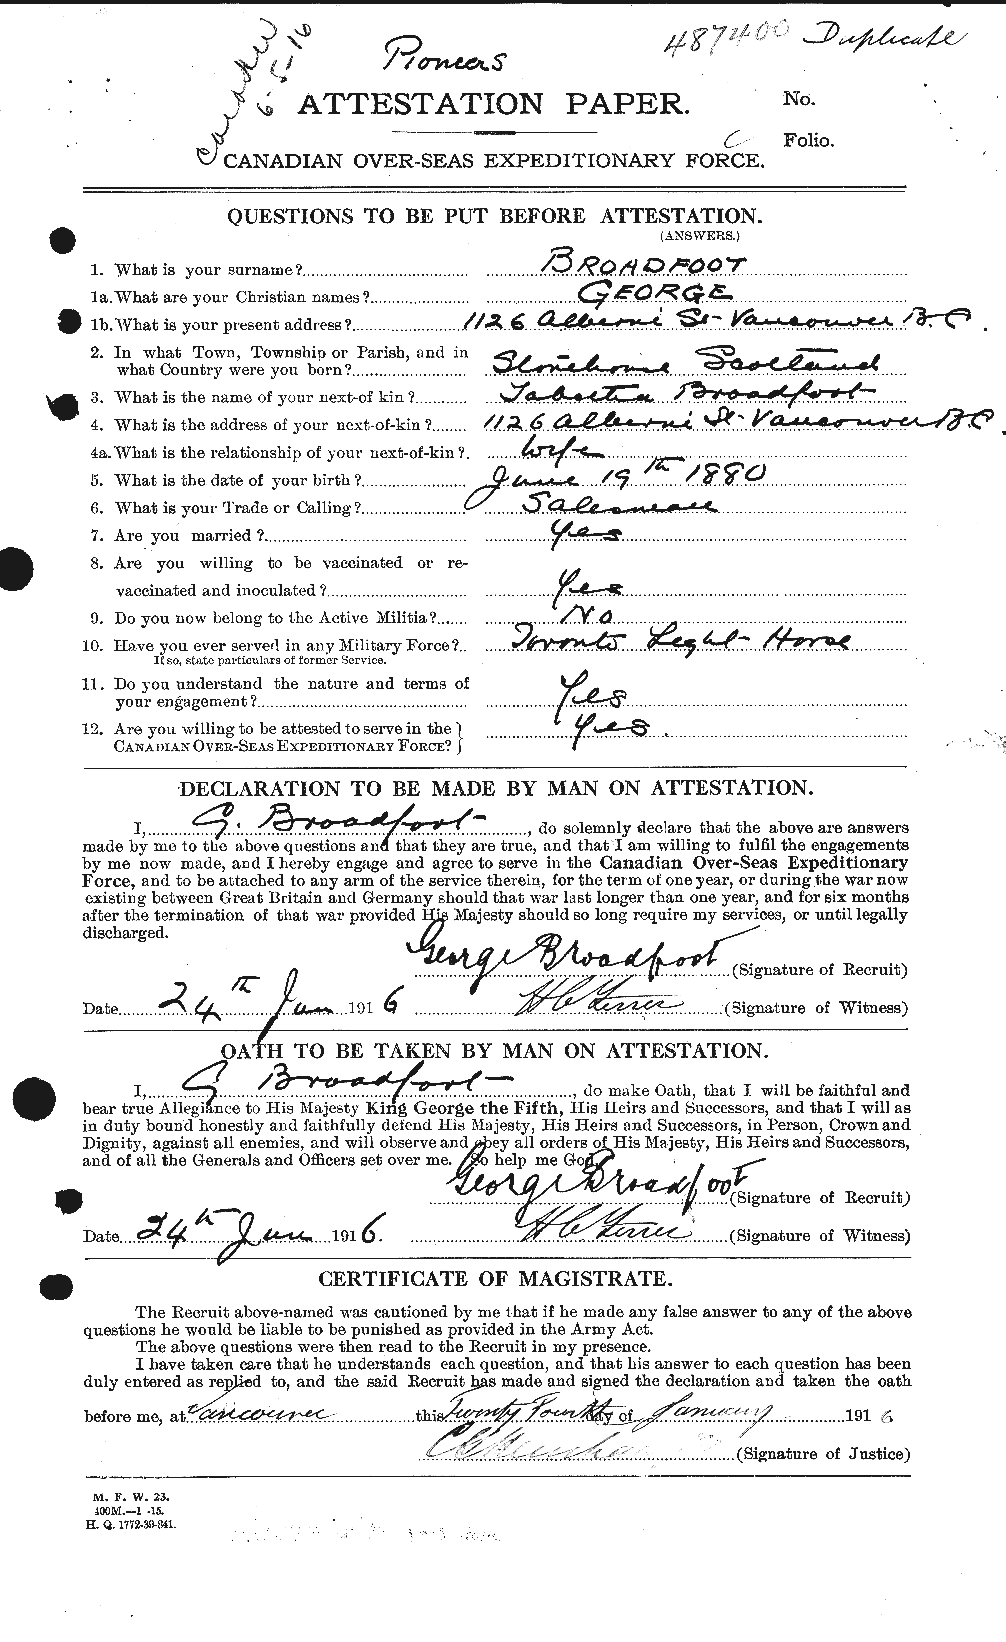 Personnel Records of the First World War - CEF 263000a